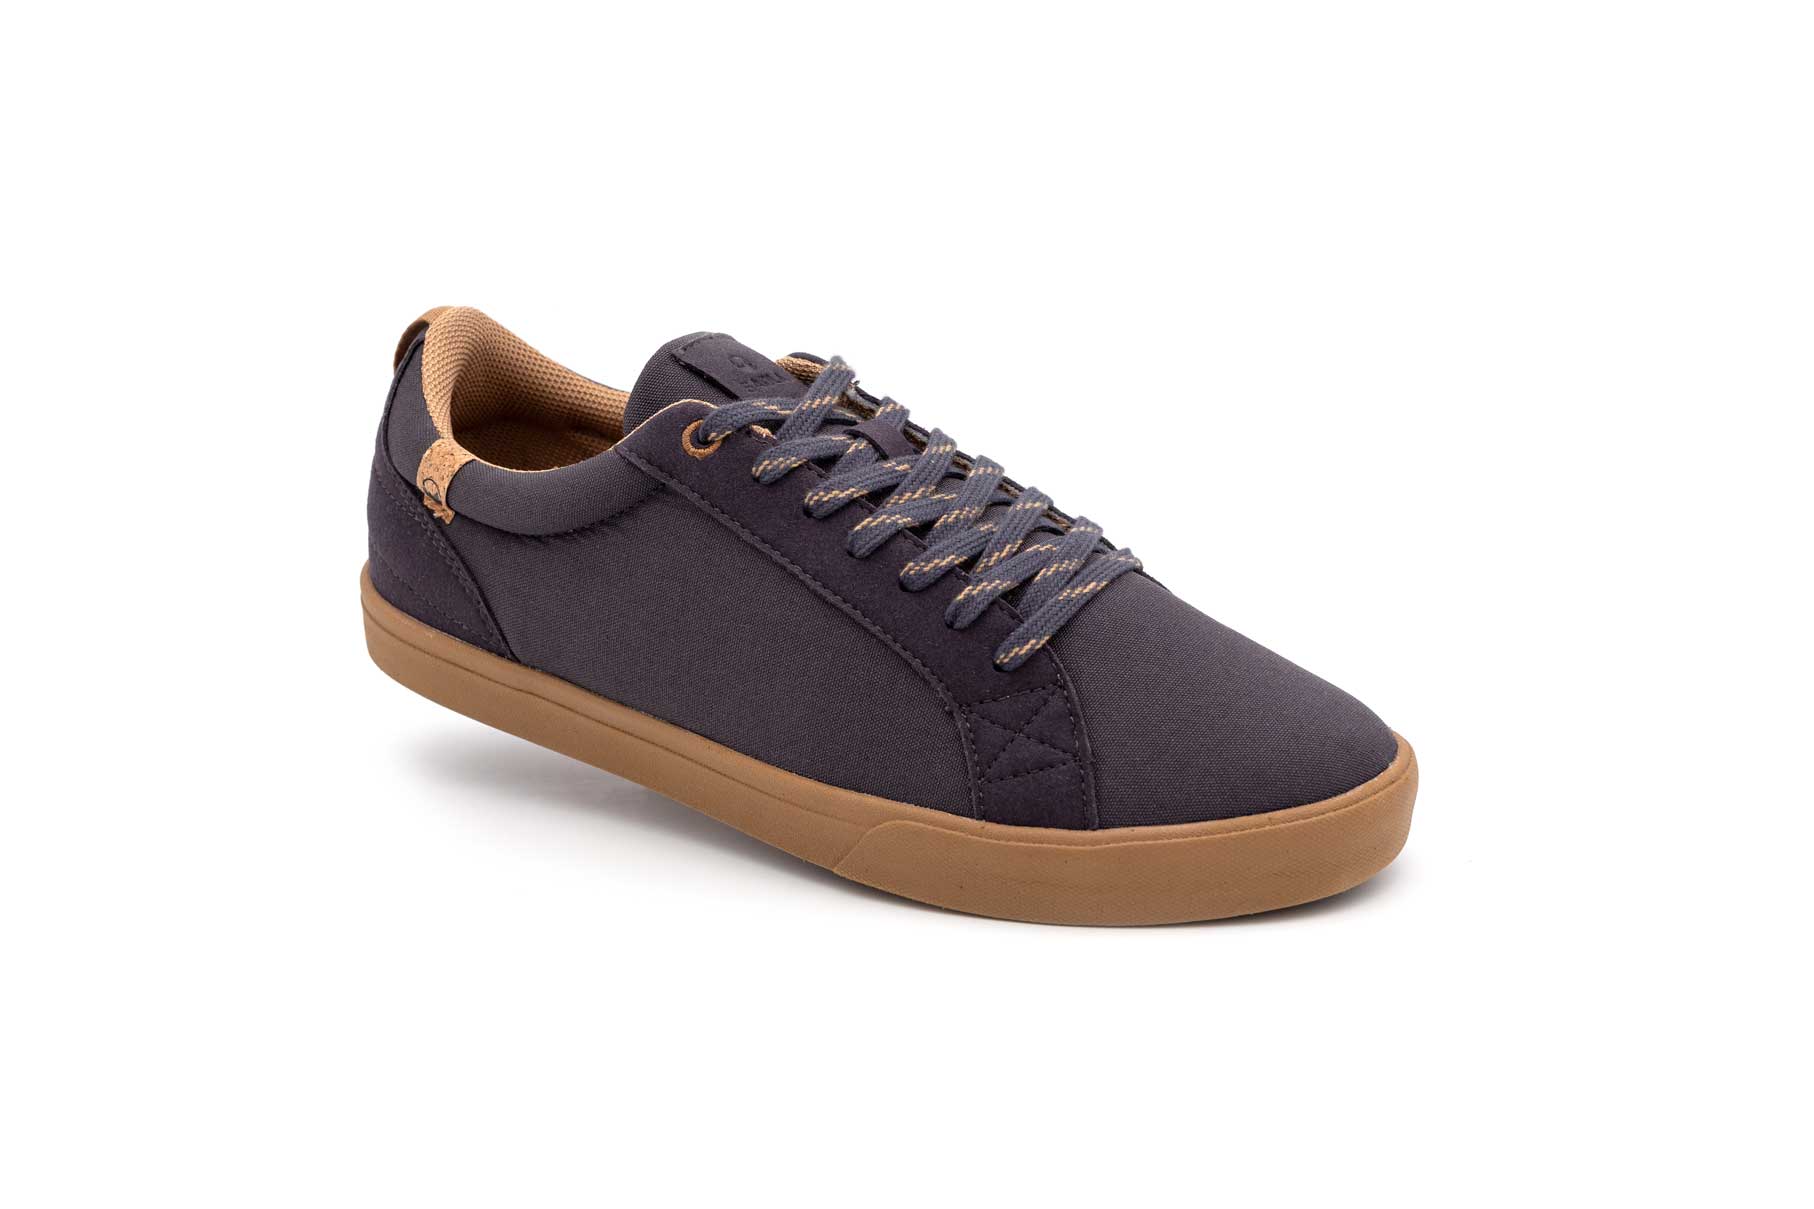 men's obsidian colour shoes overview from right side